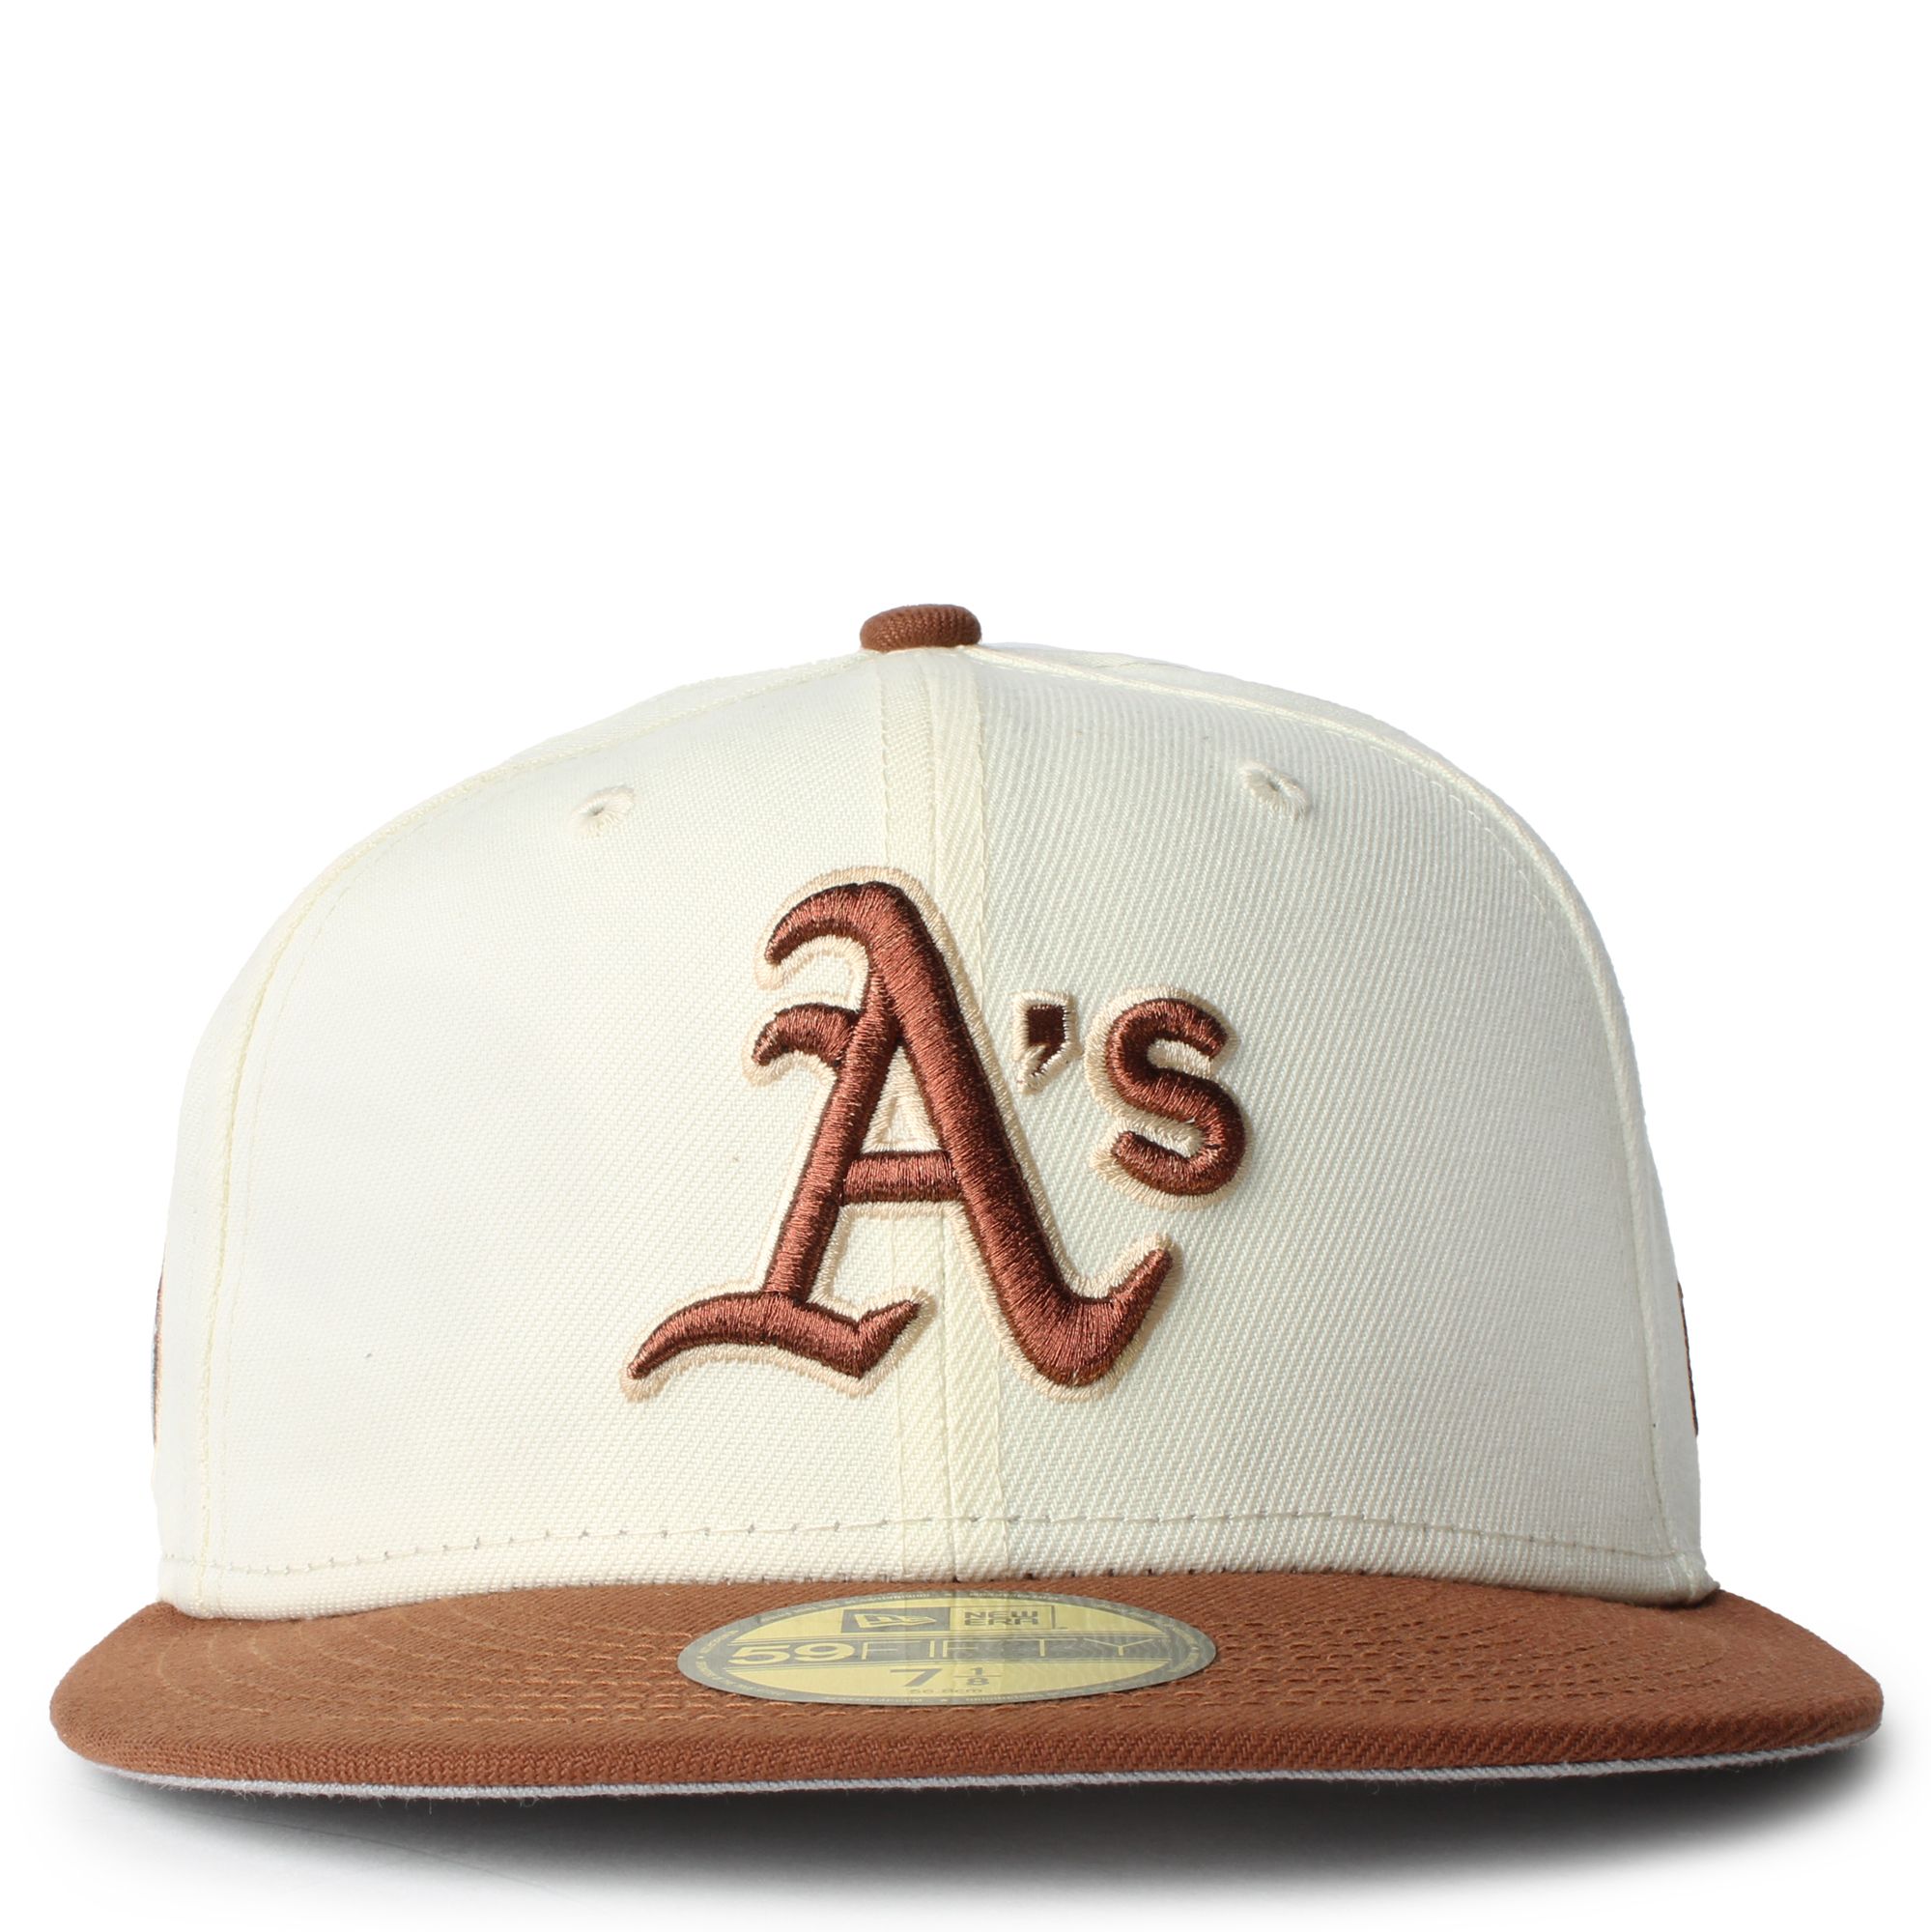 OAKLAND ATHLETICS CITY ICON 59FIFTY FITTED HAT 60426588